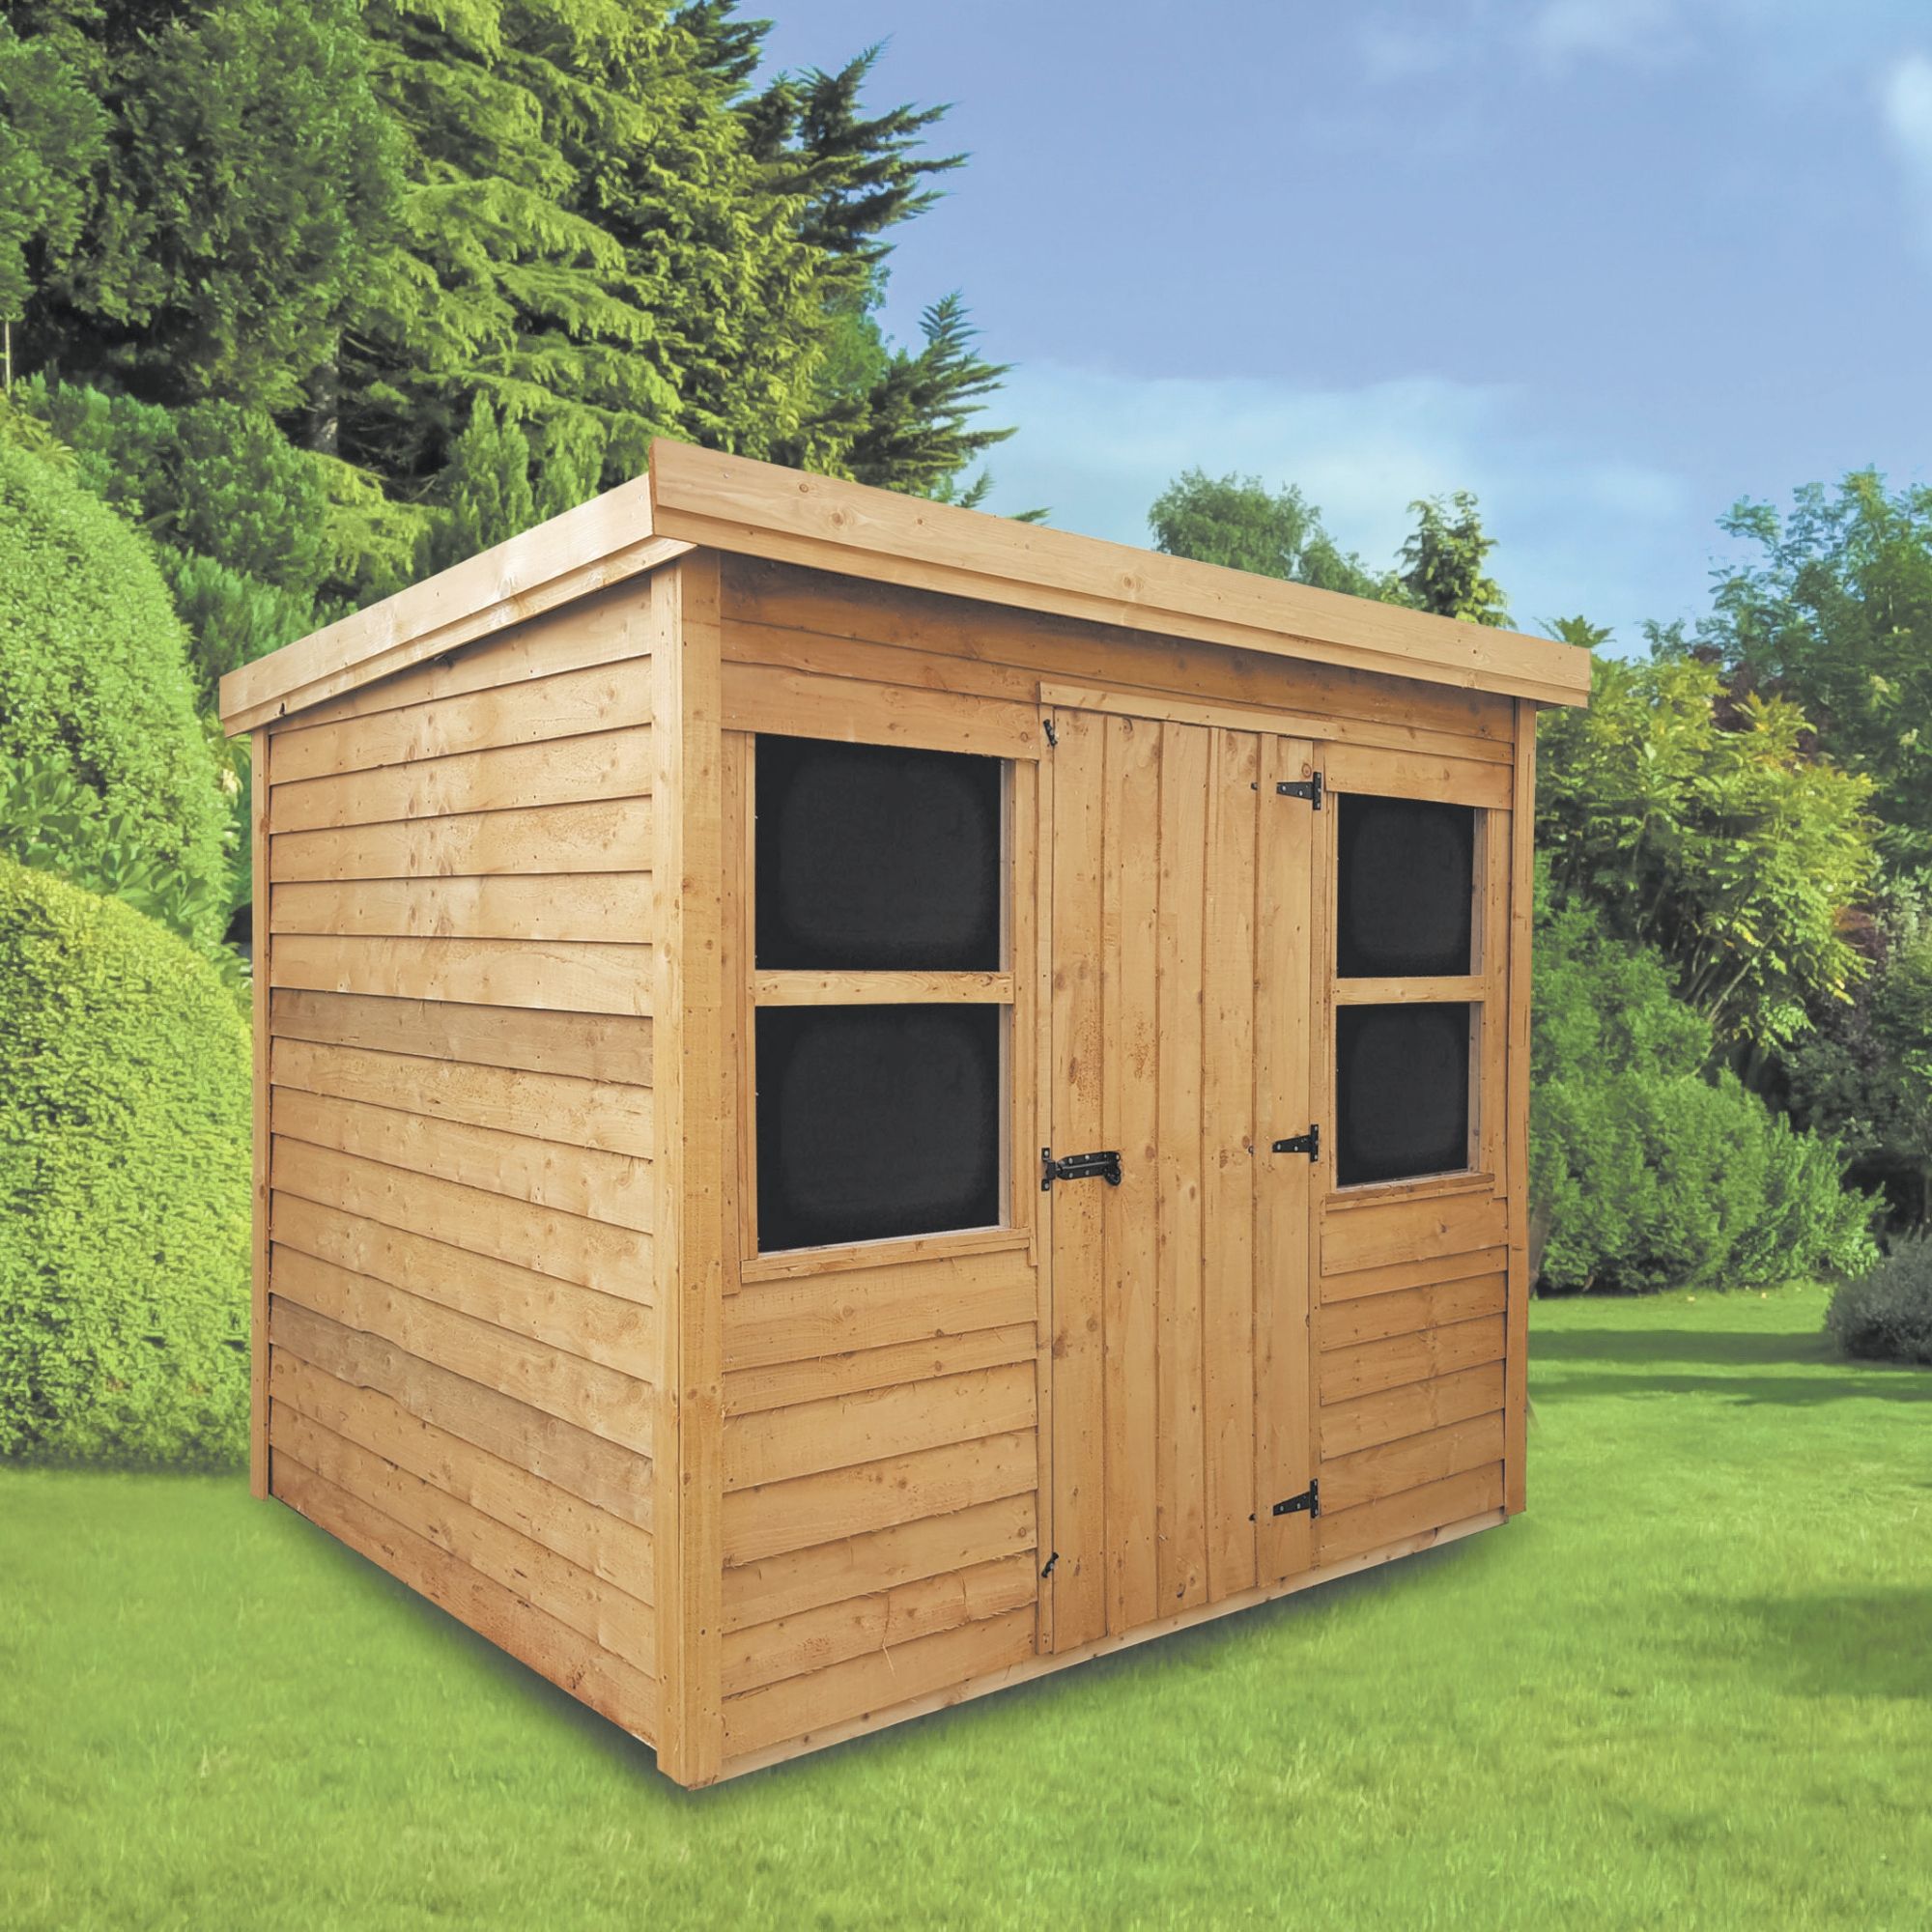 8x8 Rustic Lean to roof Overlap Wooden Shed Base included | Departments ...